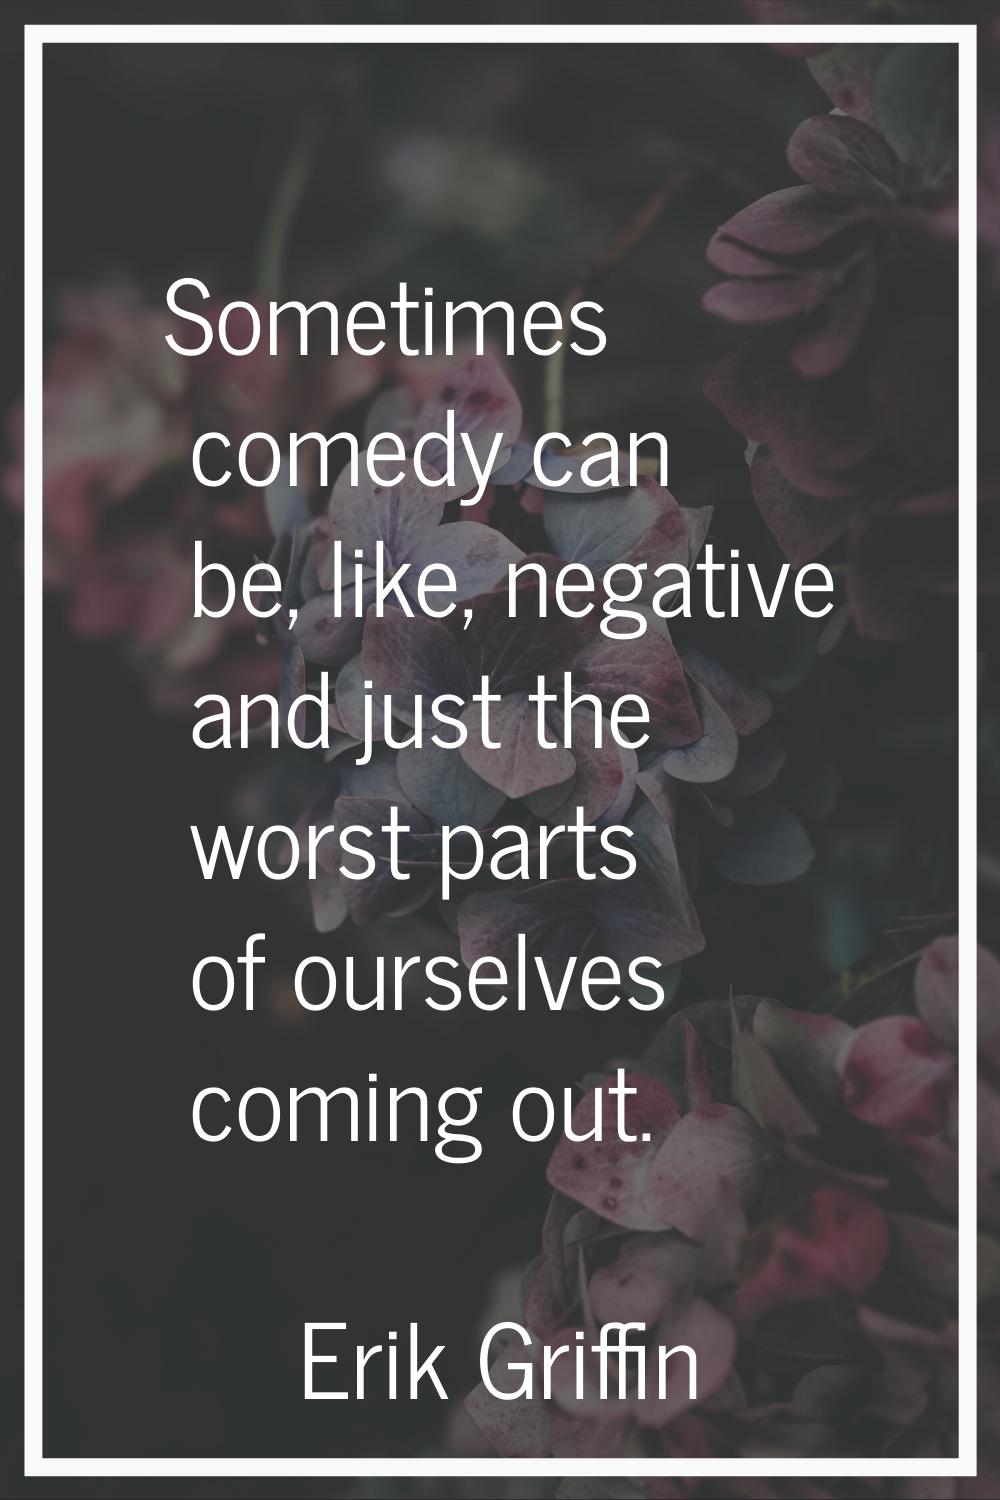 Sometimes comedy can be, like, negative and just the worst parts of ourselves coming out.